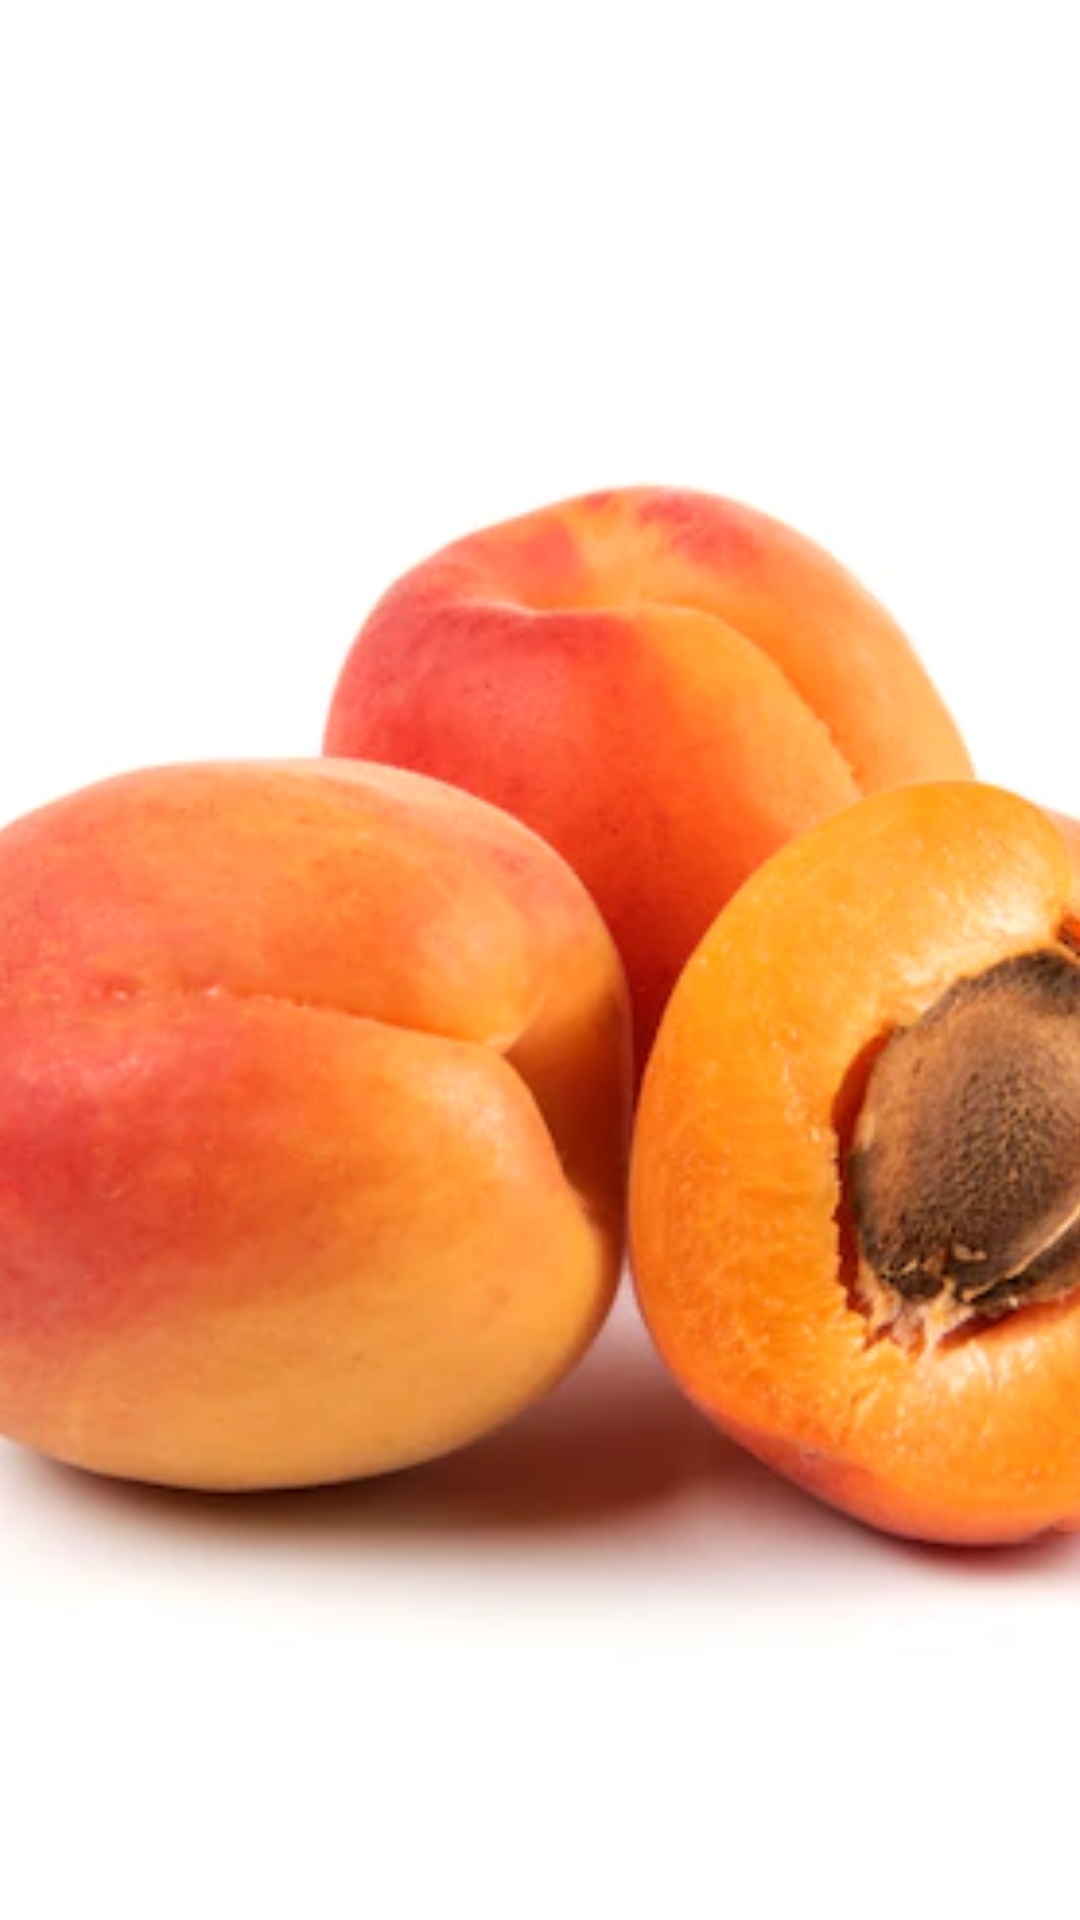 Apricots promote eye health; know more benefits